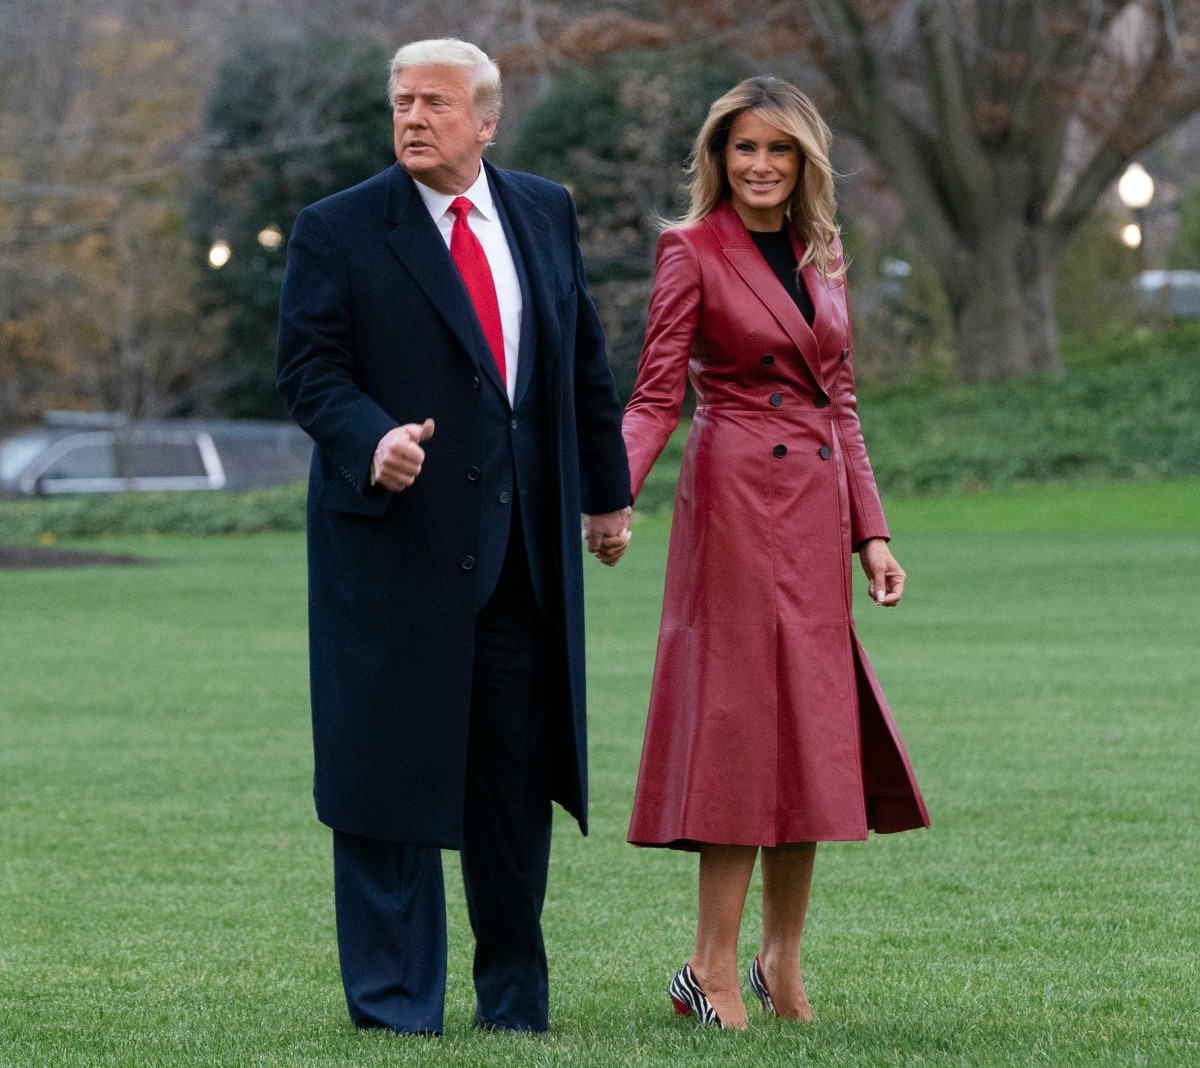 United States President Donald J. Trump and First lady Melania Trump depart the White House